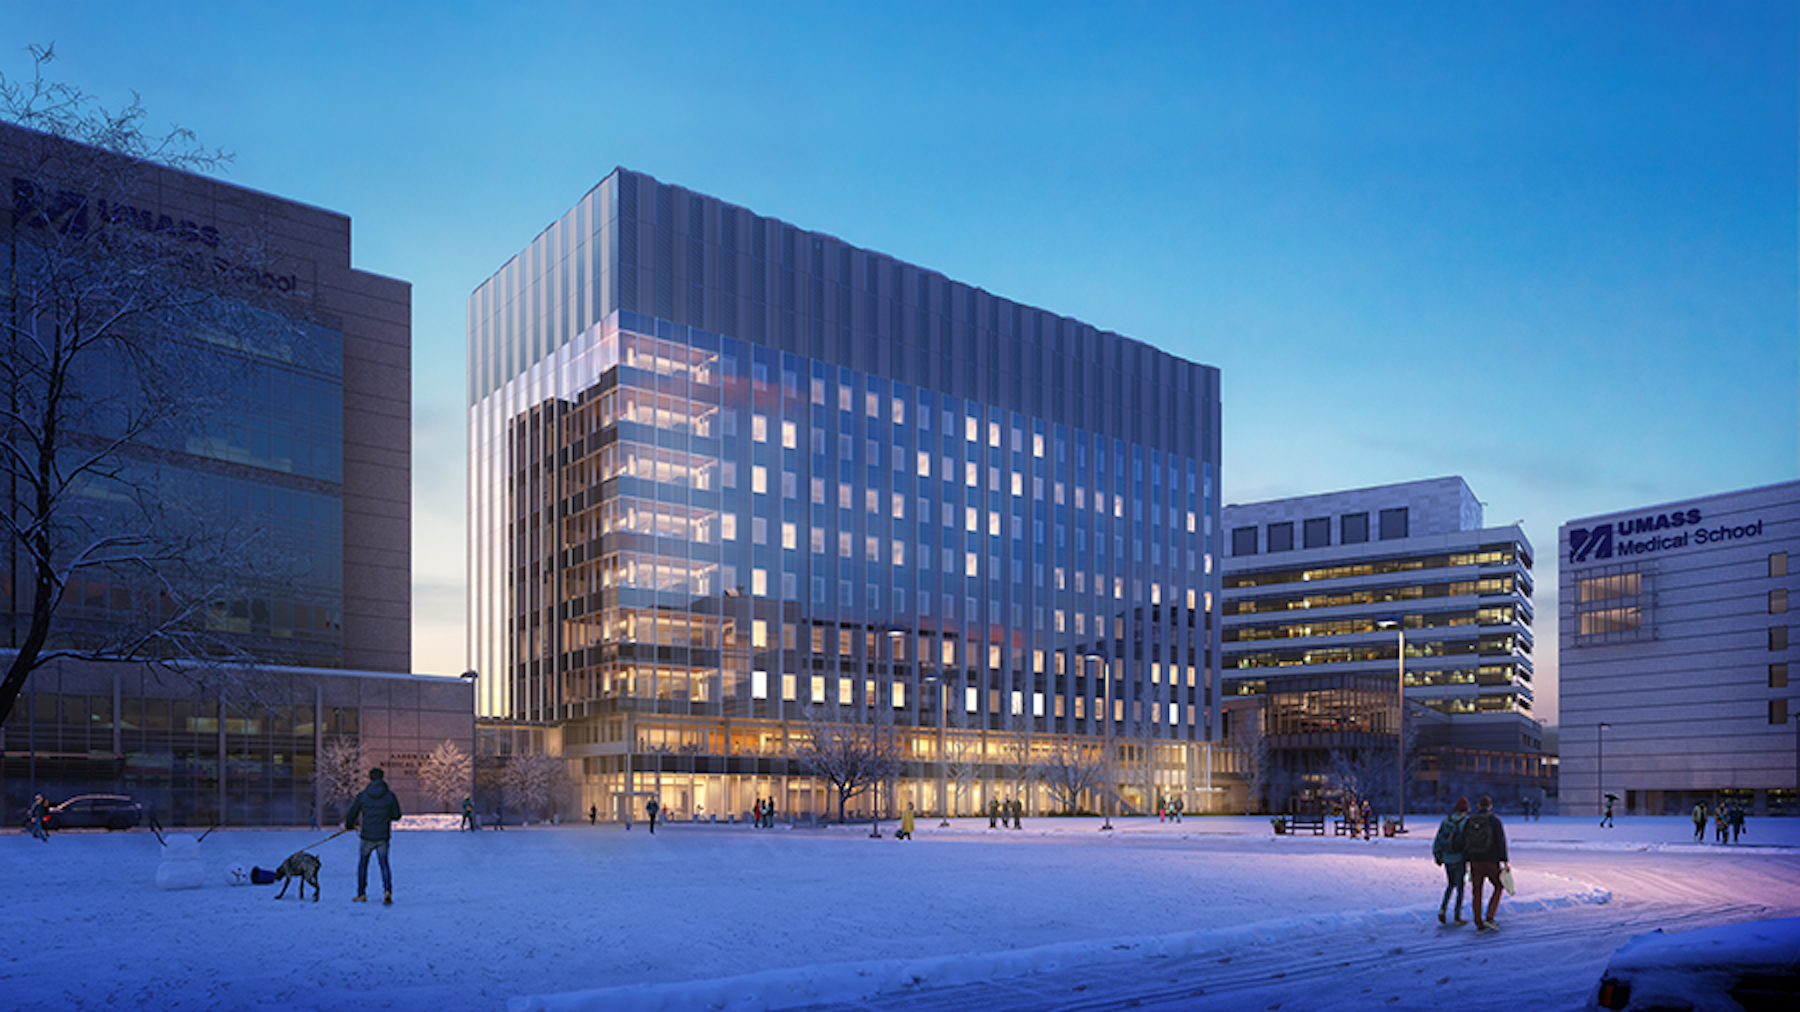 New UMass Medical School building enables expanded medical class sizes